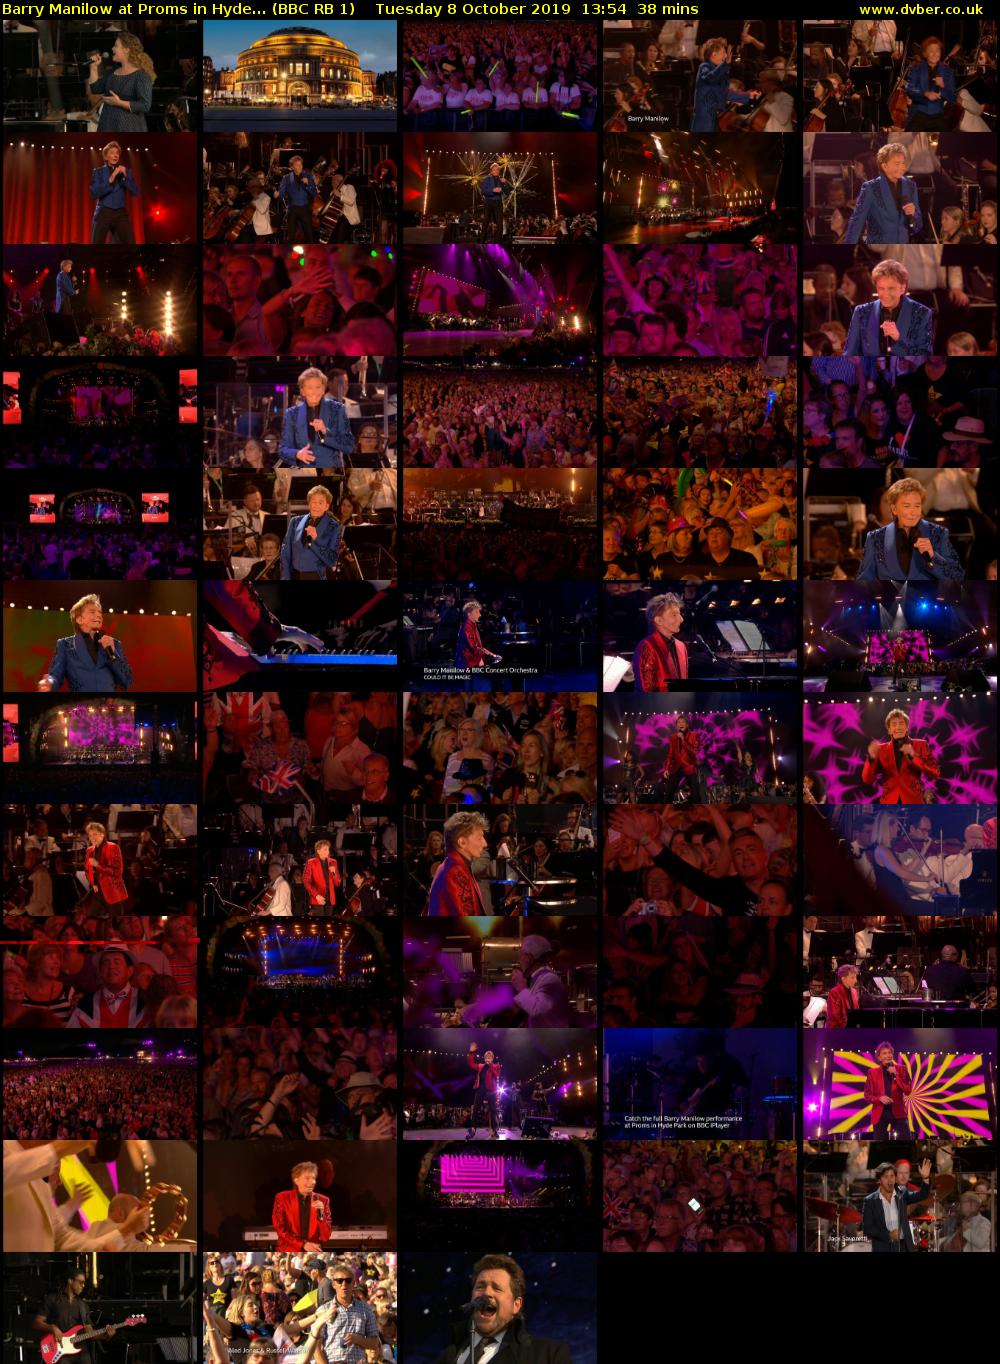 Barry Manilow at Proms in Hyde... (BBC RB 1) Tuesday 8 October 2019 13:54 - 14:32